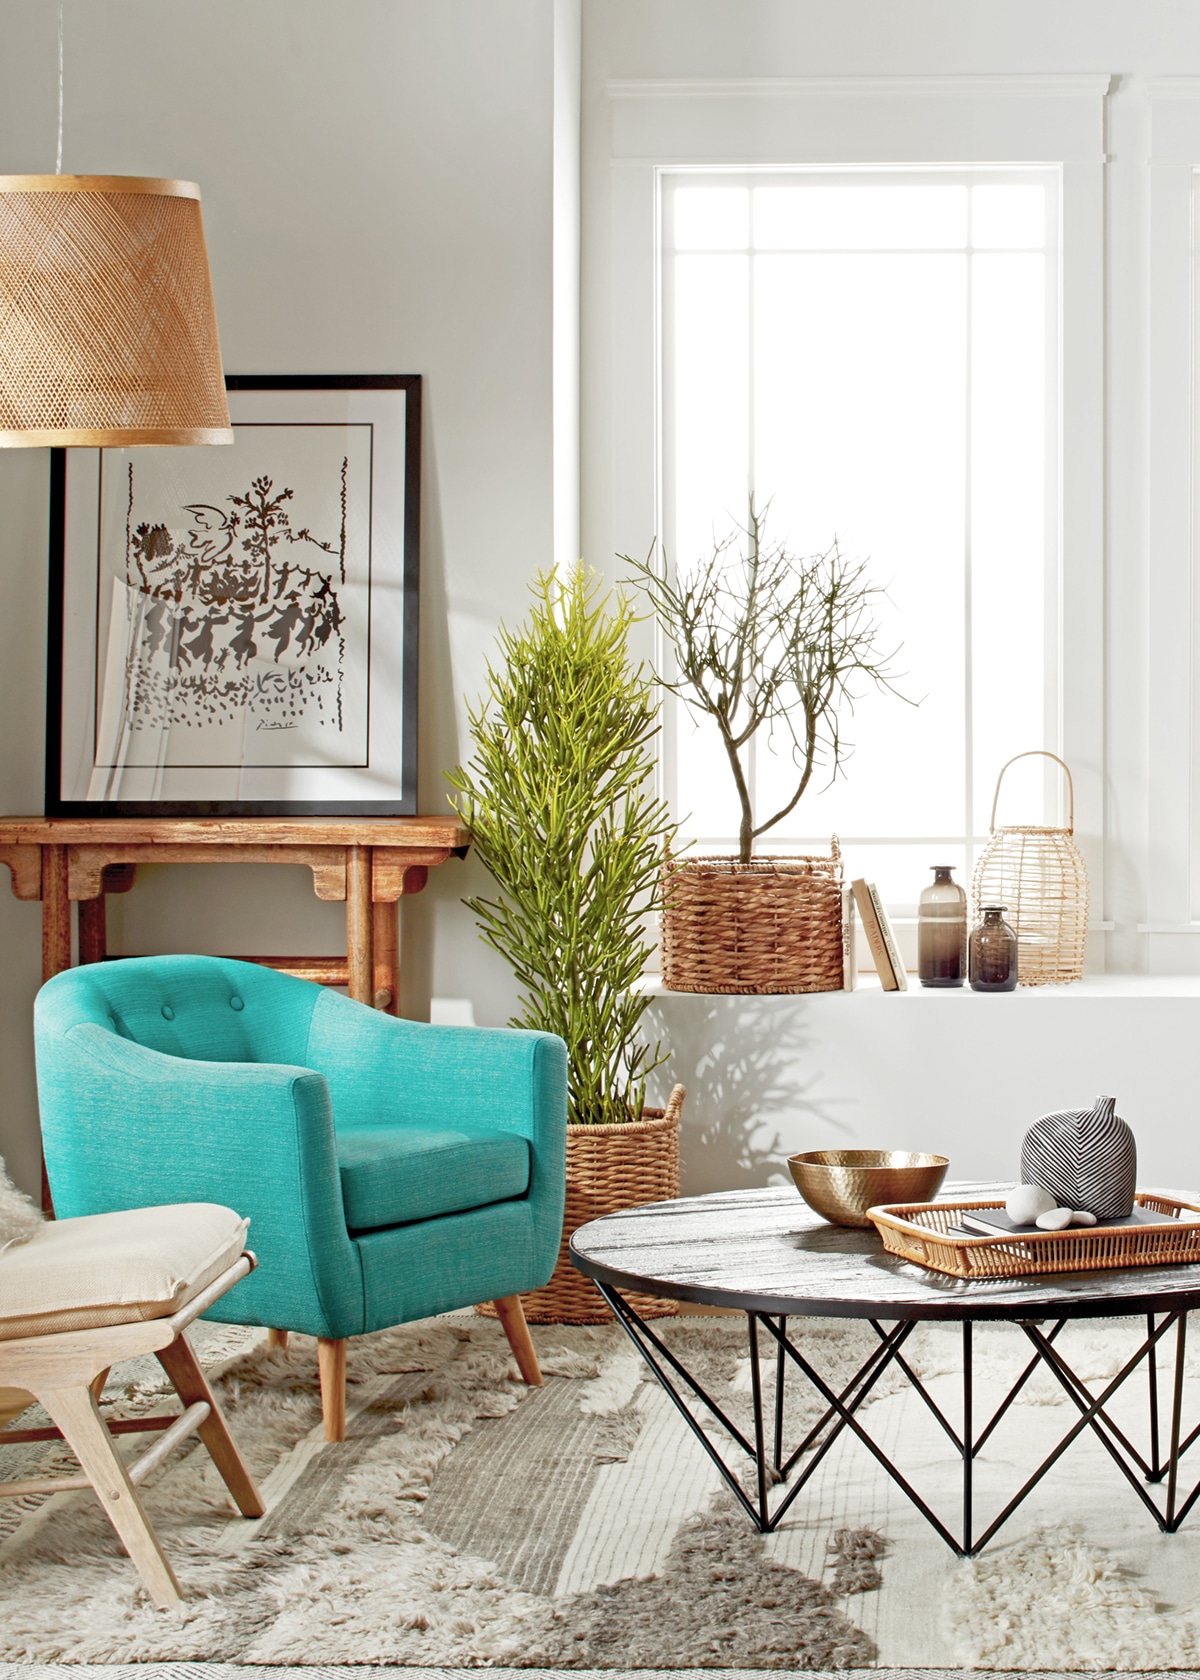 california vibes in our living room design for the Overstock design challenge | coco kelley